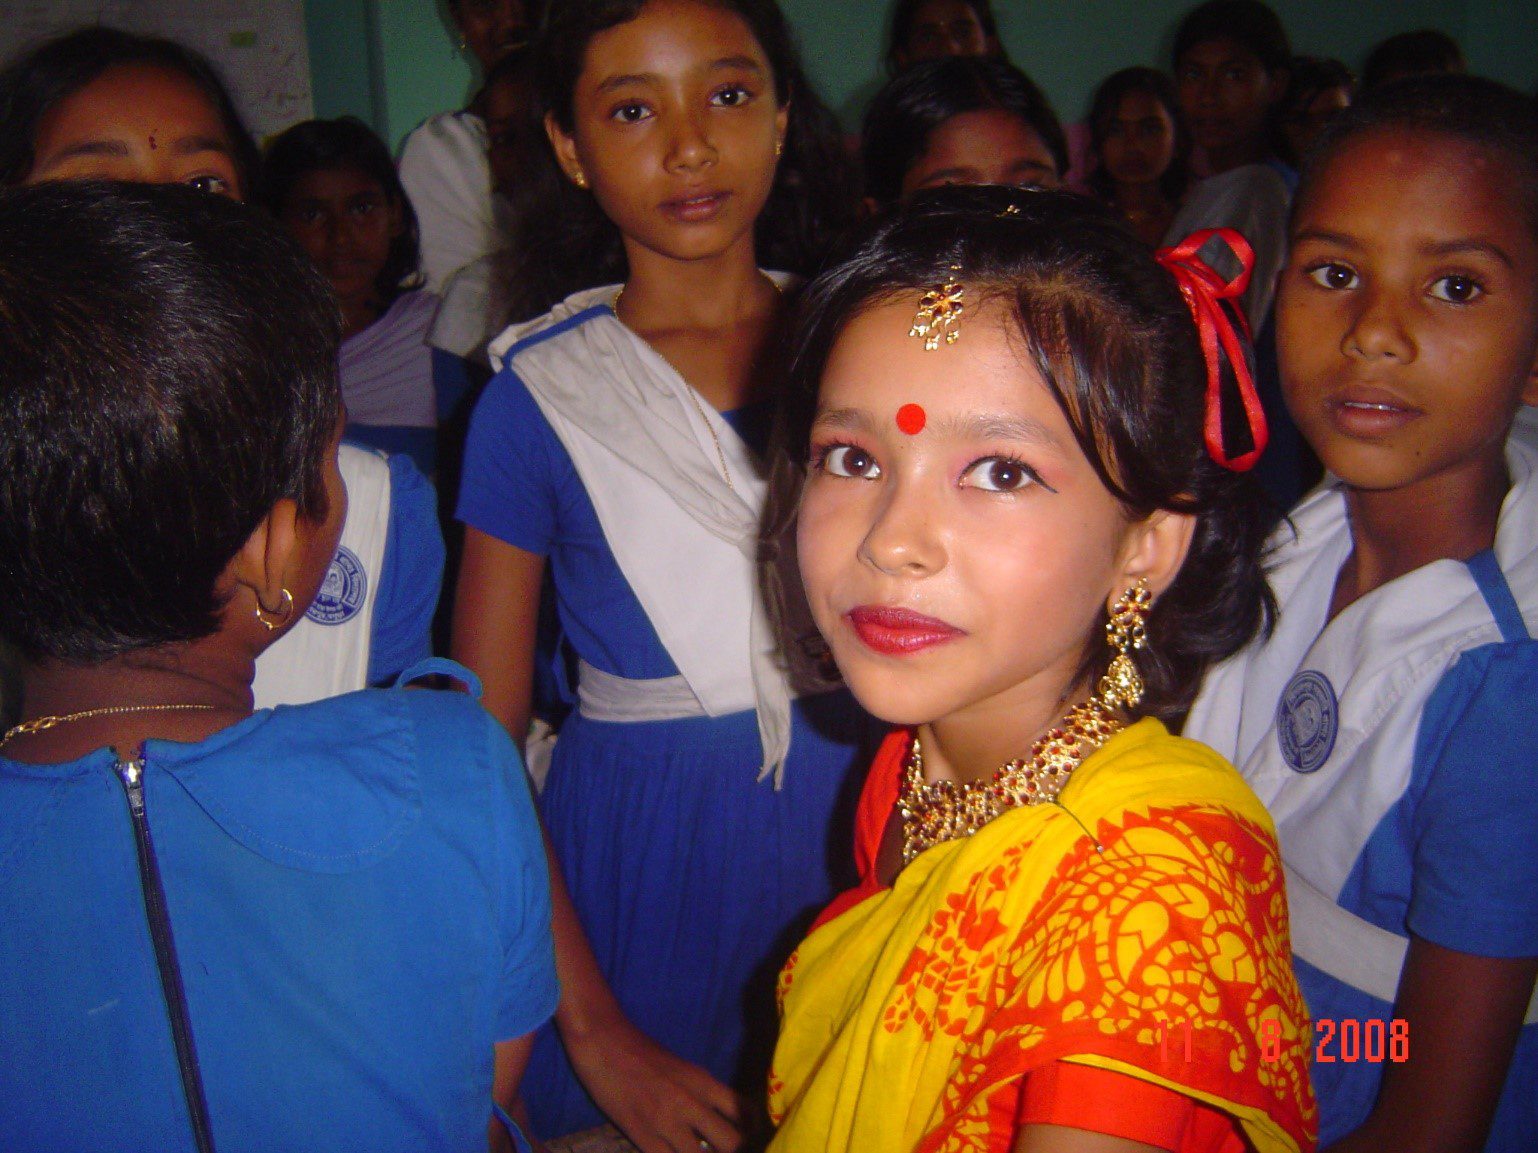 Indian girl in traditional dress